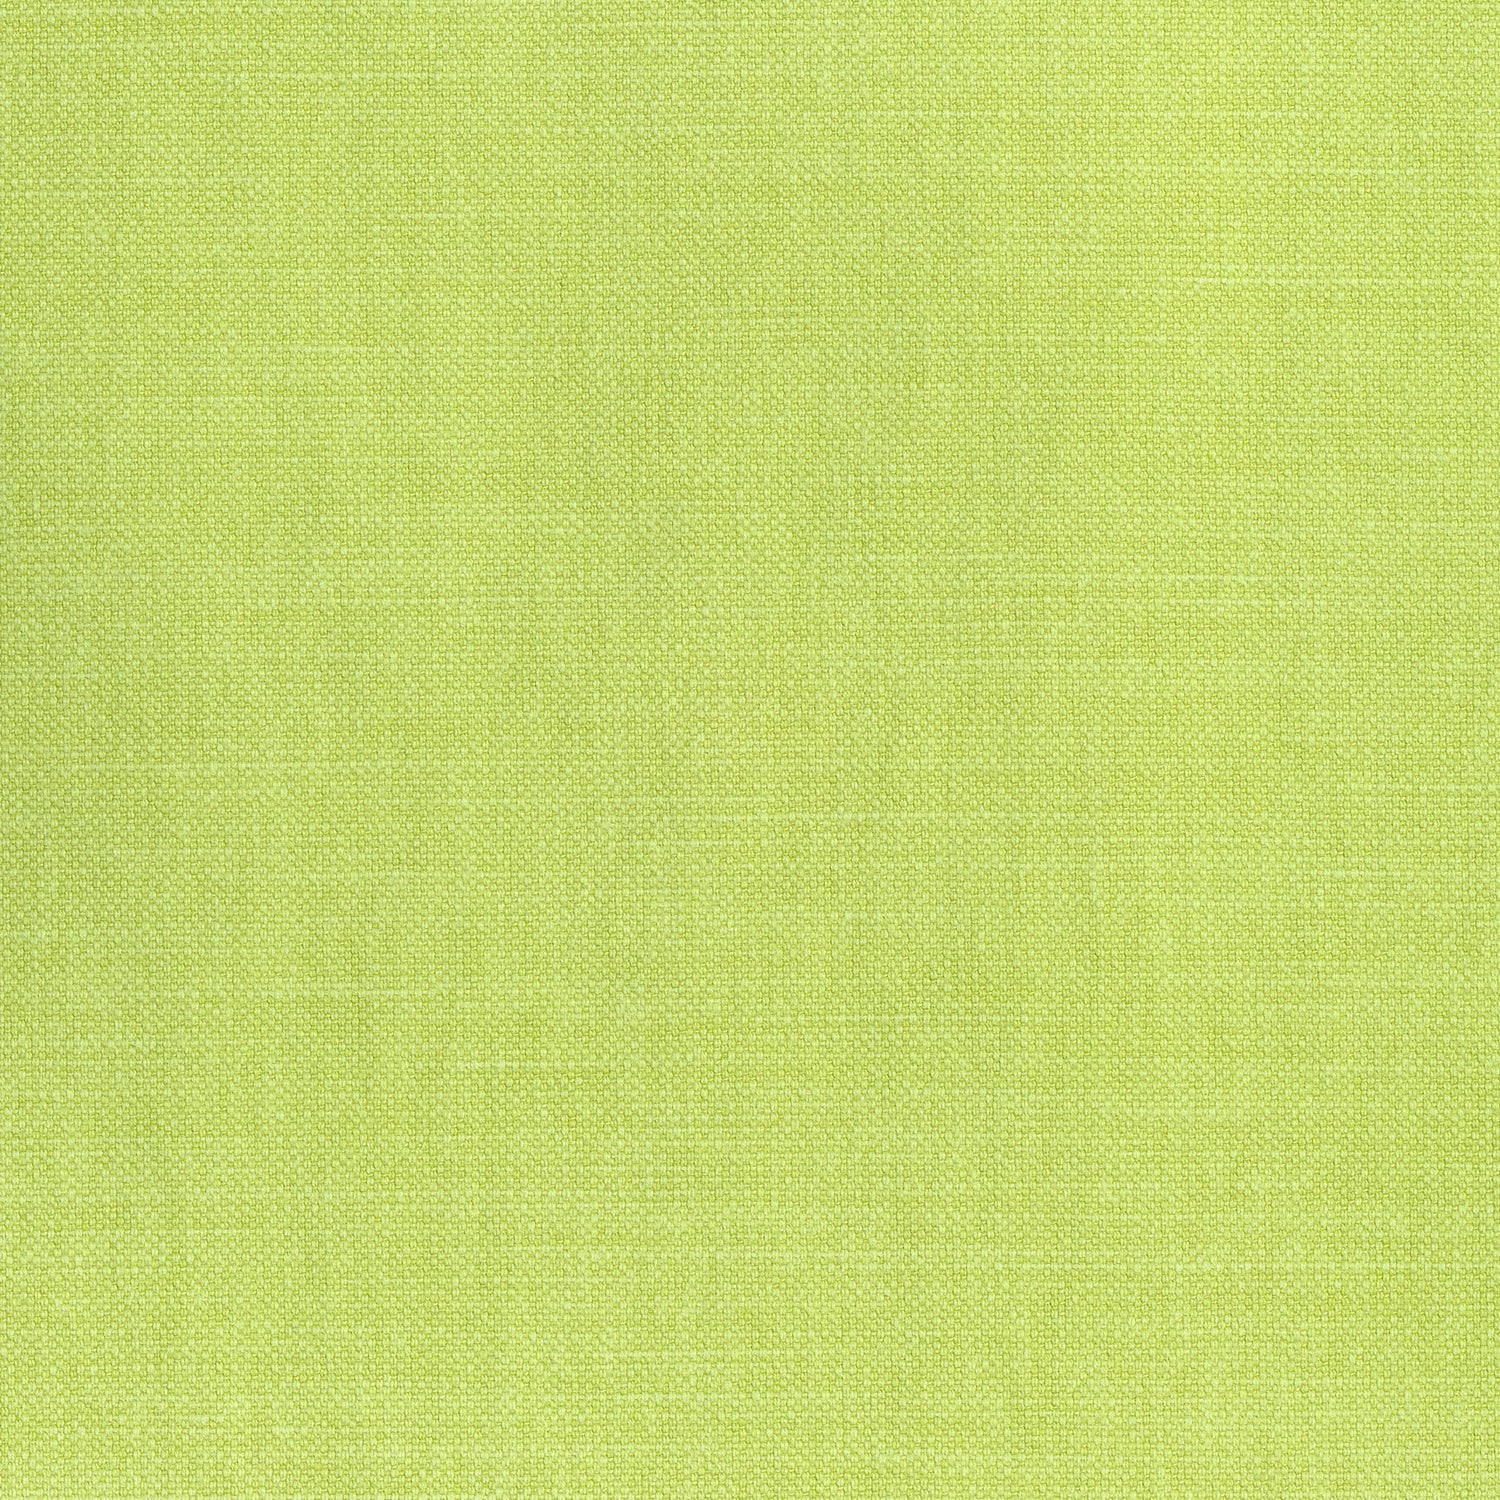 Prisma fabric in spring green color - pattern number W70139 - by Thibaut in the Woven Resource Vol 12 Prisma Fabrics collection